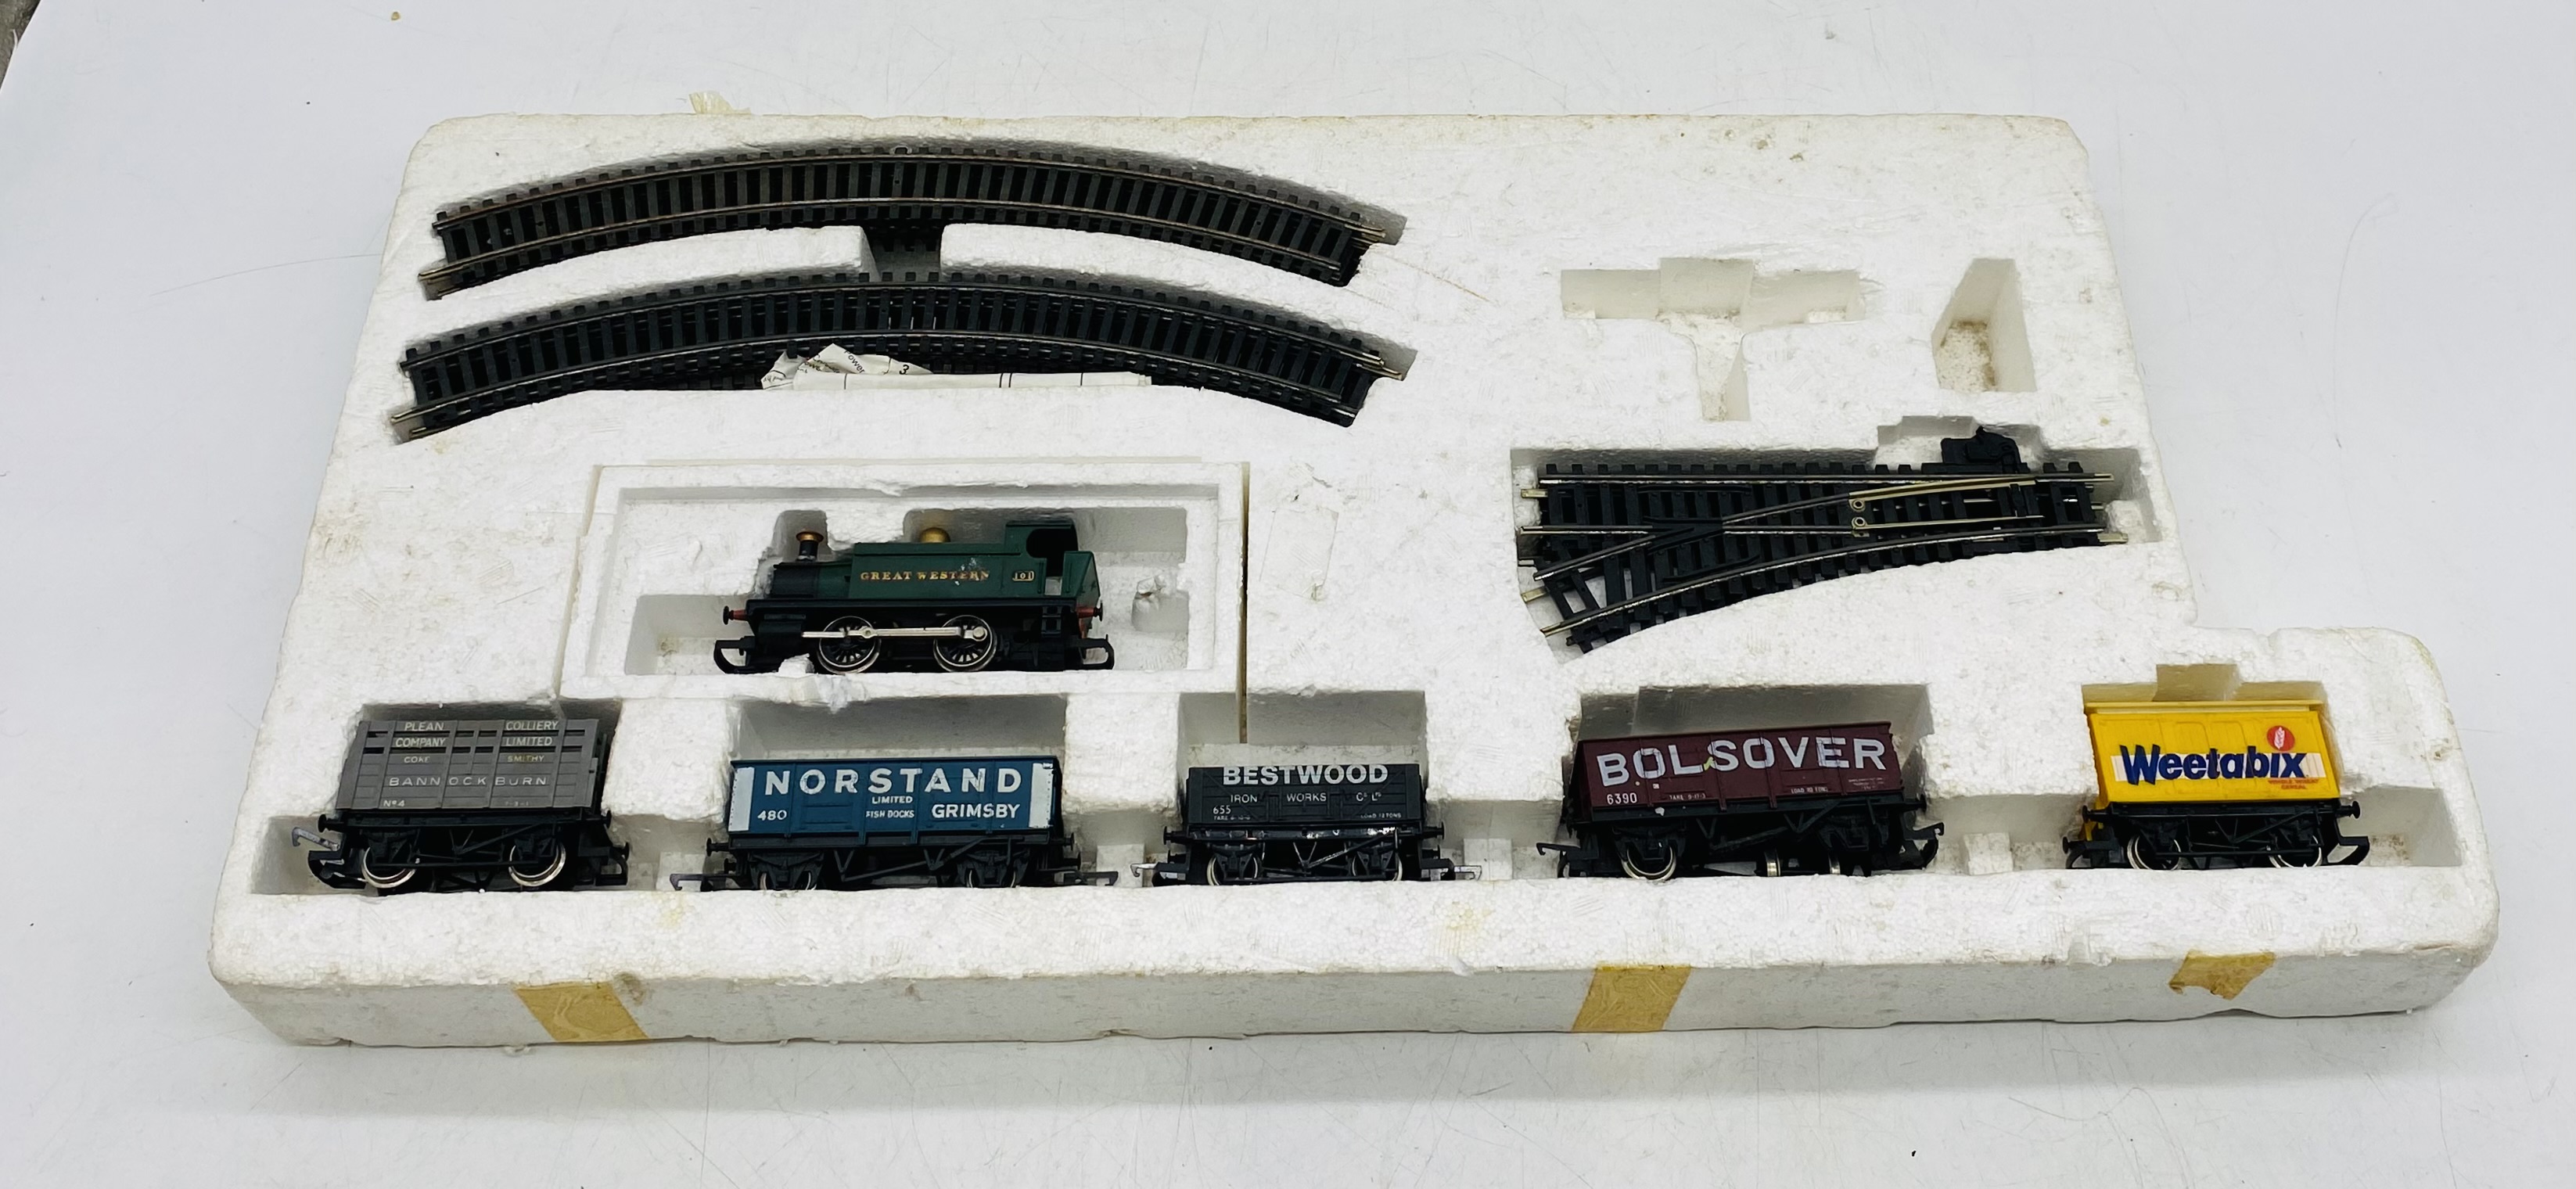 A collection of model railway OO gauge rolling stock, carriages, track and single locomotive. - Image 5 of 7